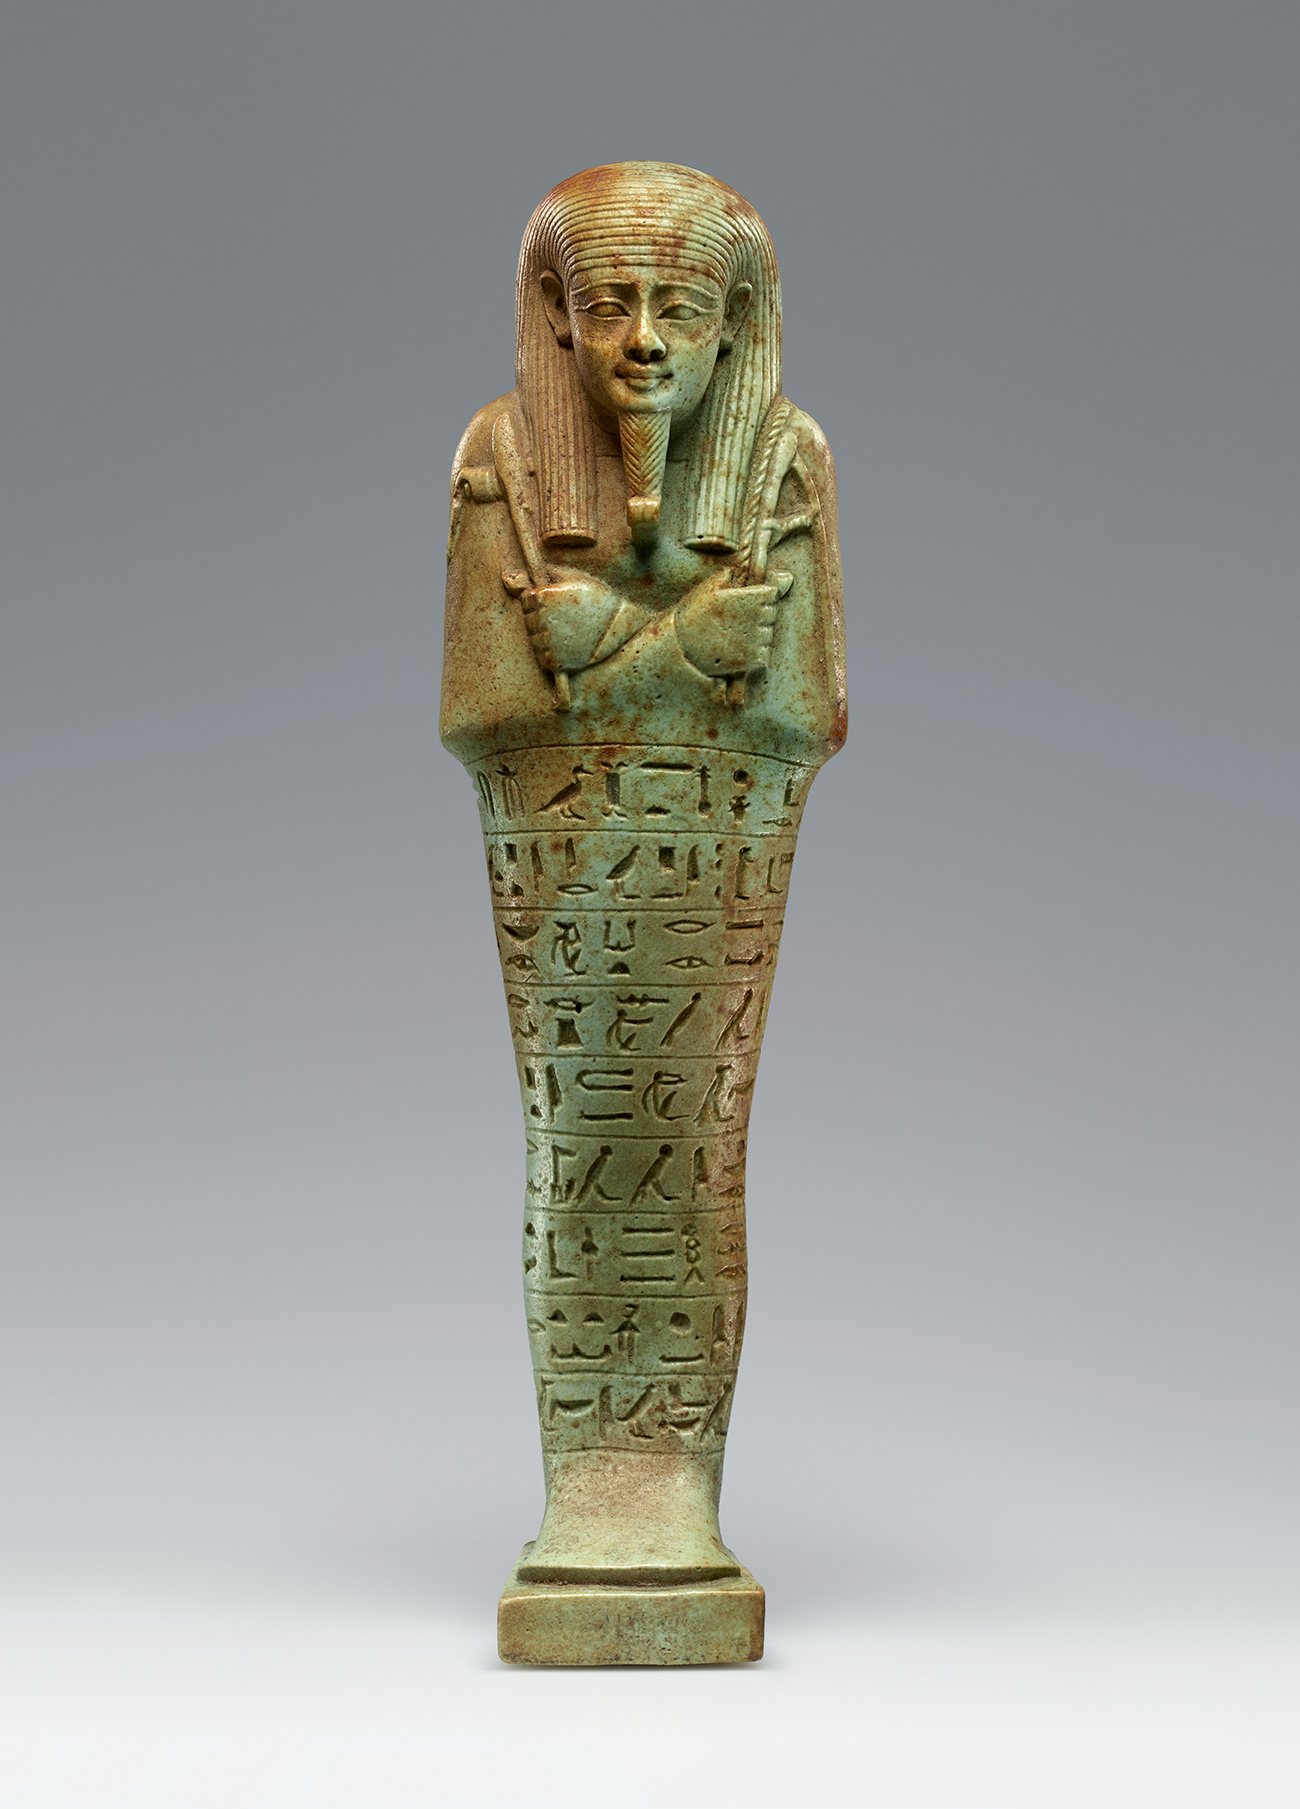 Ushabti for Neferibresaneith, about 570–526 B.C., Egyptian. Green faience, 7 3/16 × 2 1/16 in. The J. Paul Getty Museum, 2016.2. Digital image courtesy of Getty’s Open Content Program